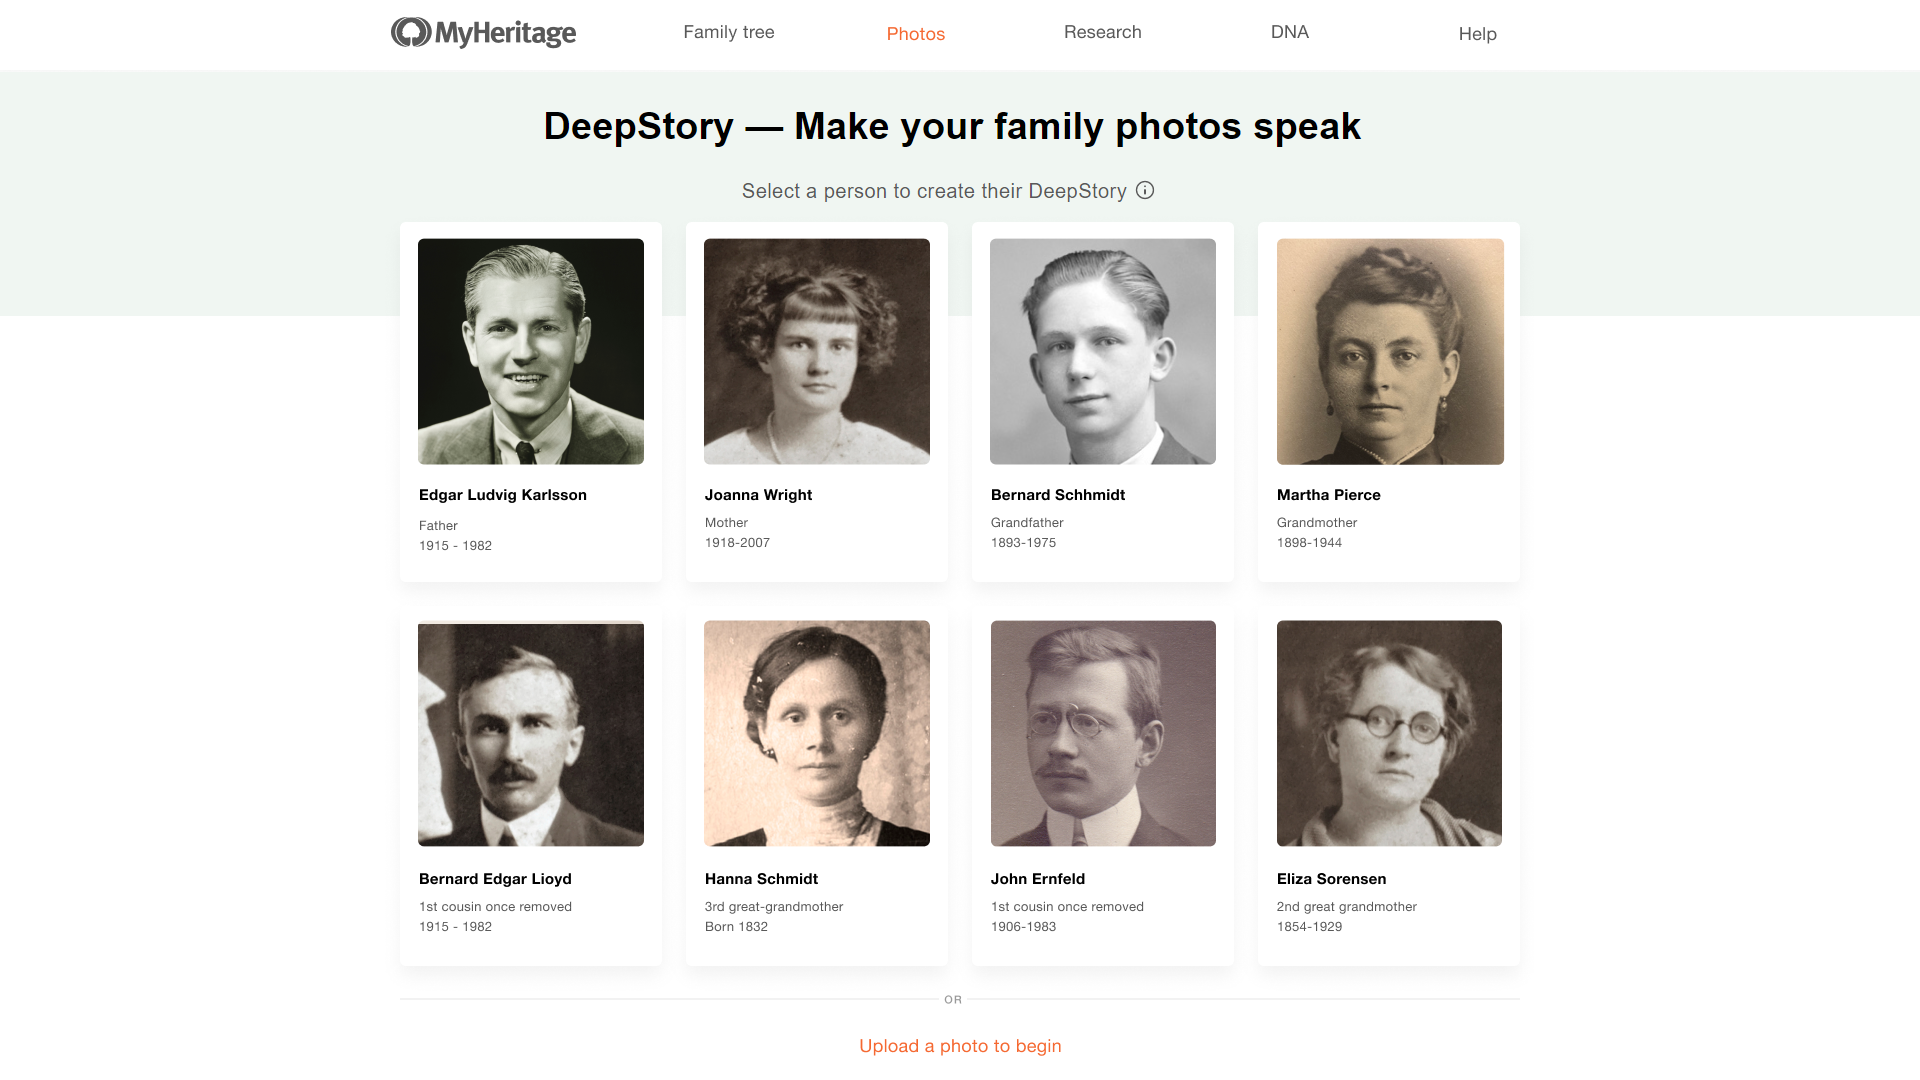 The DeepStory lobby page